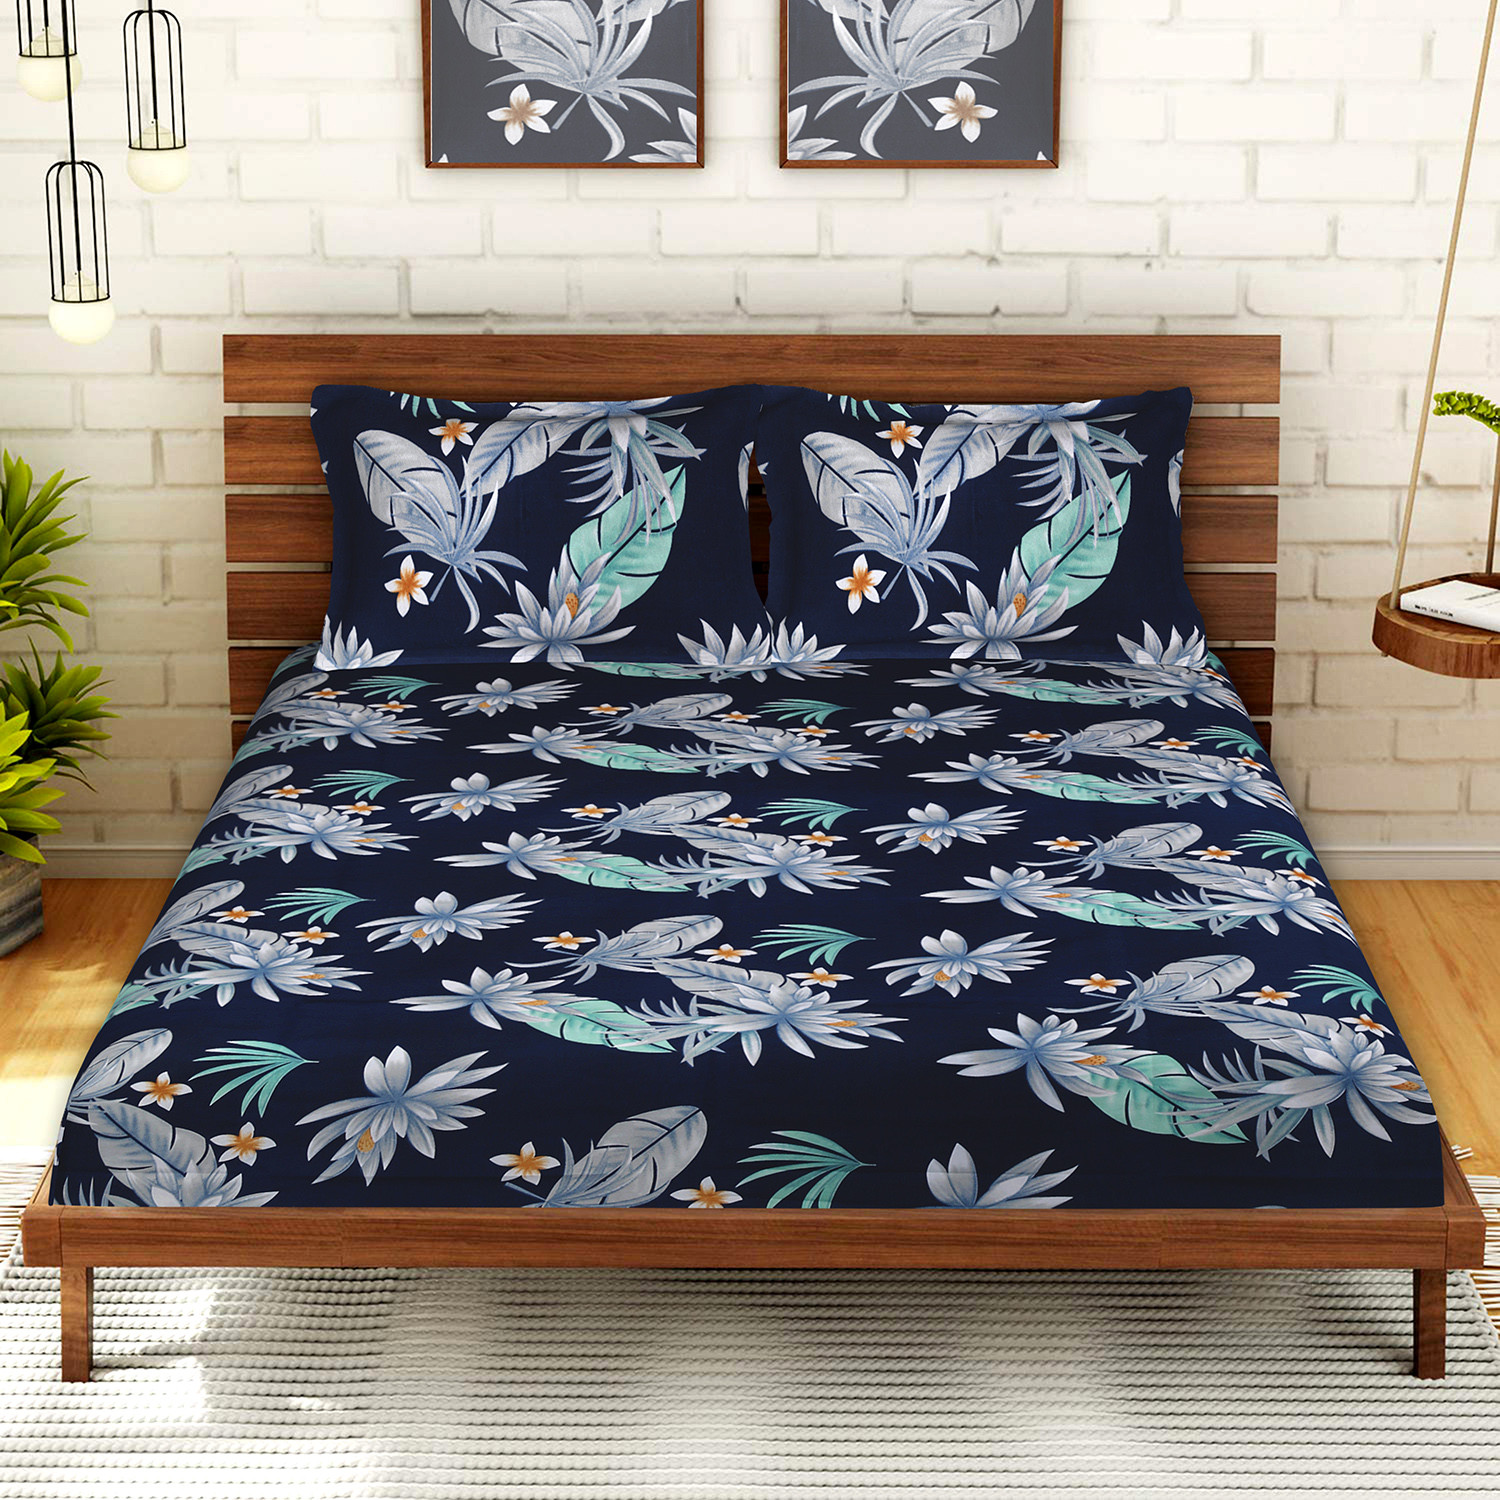 Kuber Industries Glace Cotton Leaf Print Double Bedsheet With 2 Pillow Covers,90x100,(Navy Blue)